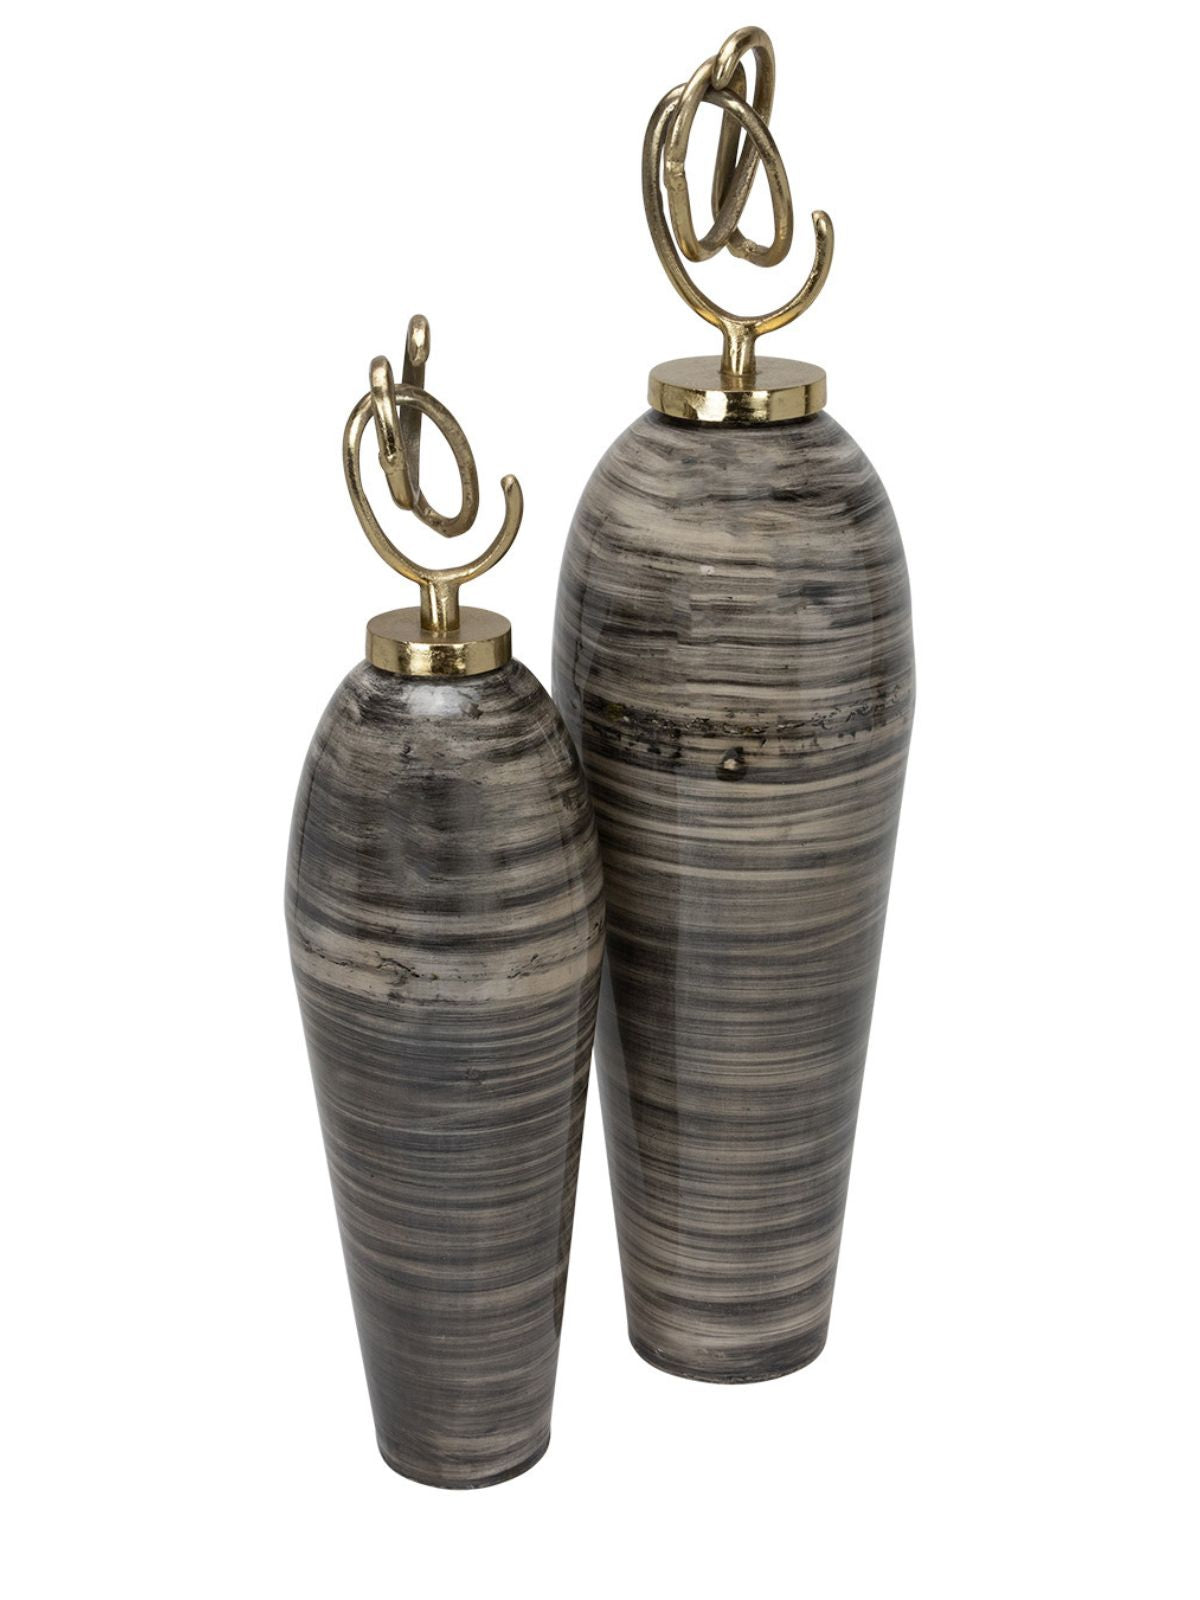 This Set of 2 trophy ceramic gray jars has a detail at the top with gold metal lids - KYA Home Decor. 